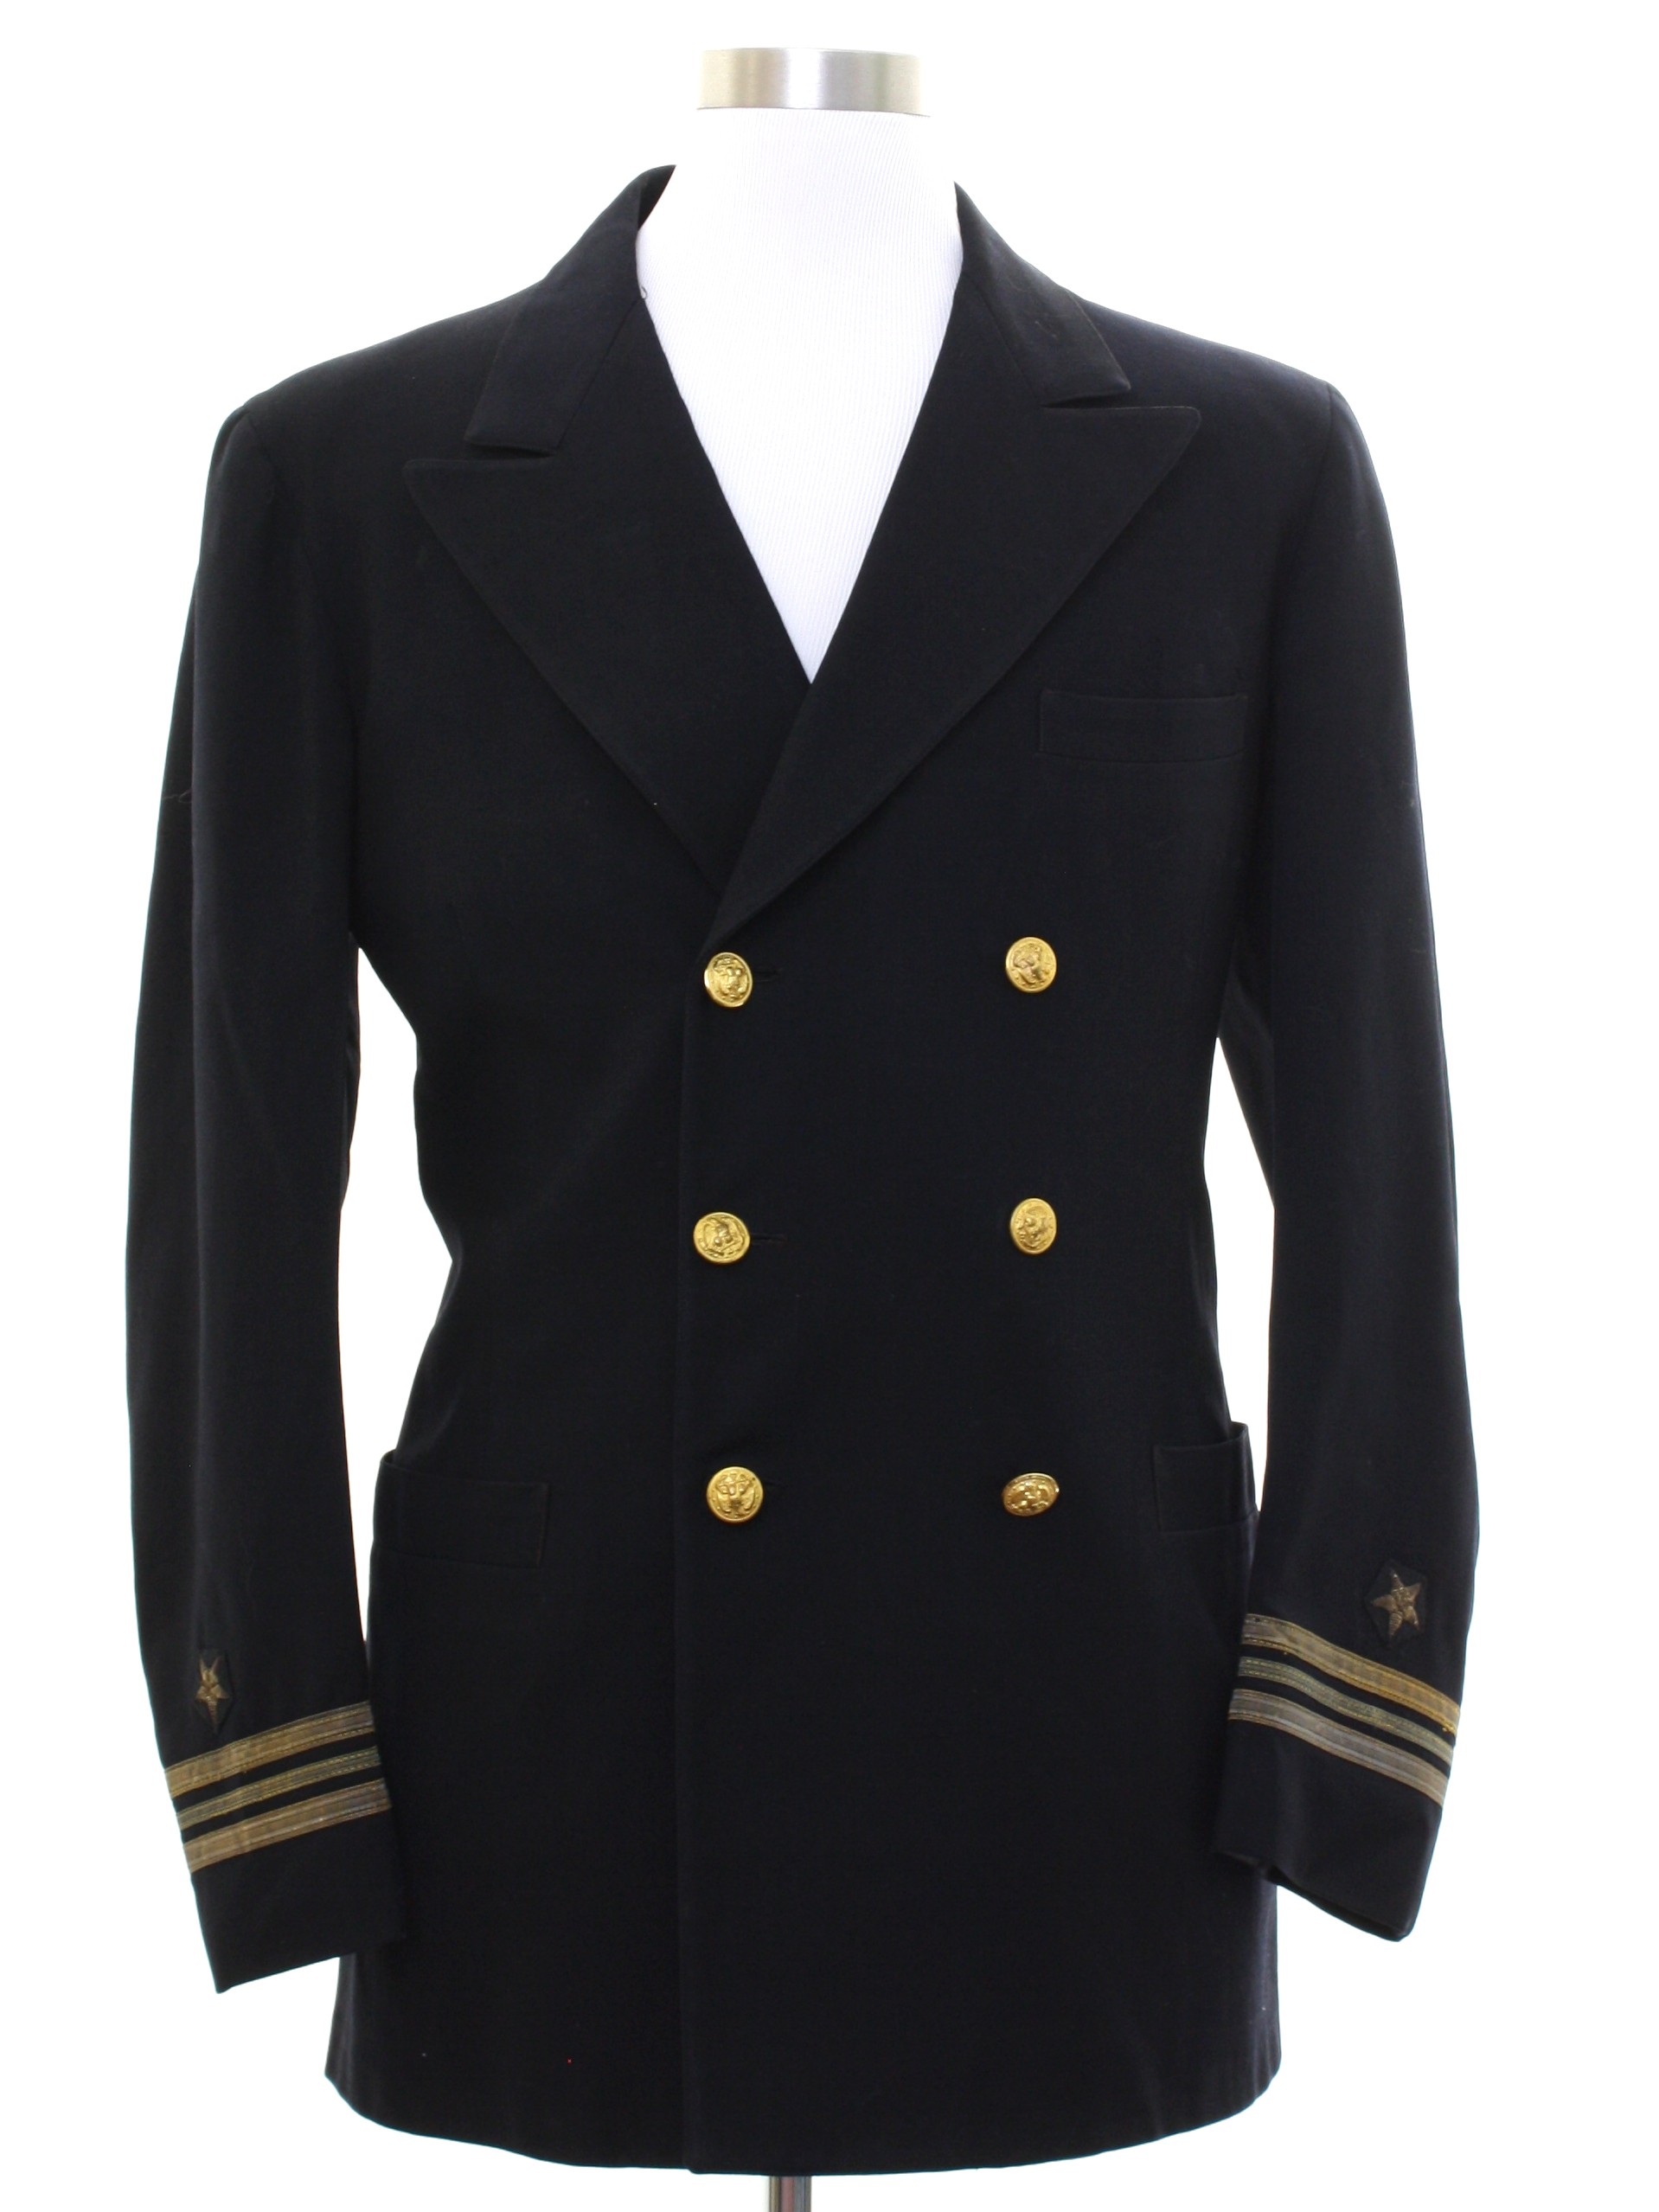 Vintage 1960's Jacket: Late 60s or Early 70s -U S Navy Uniform